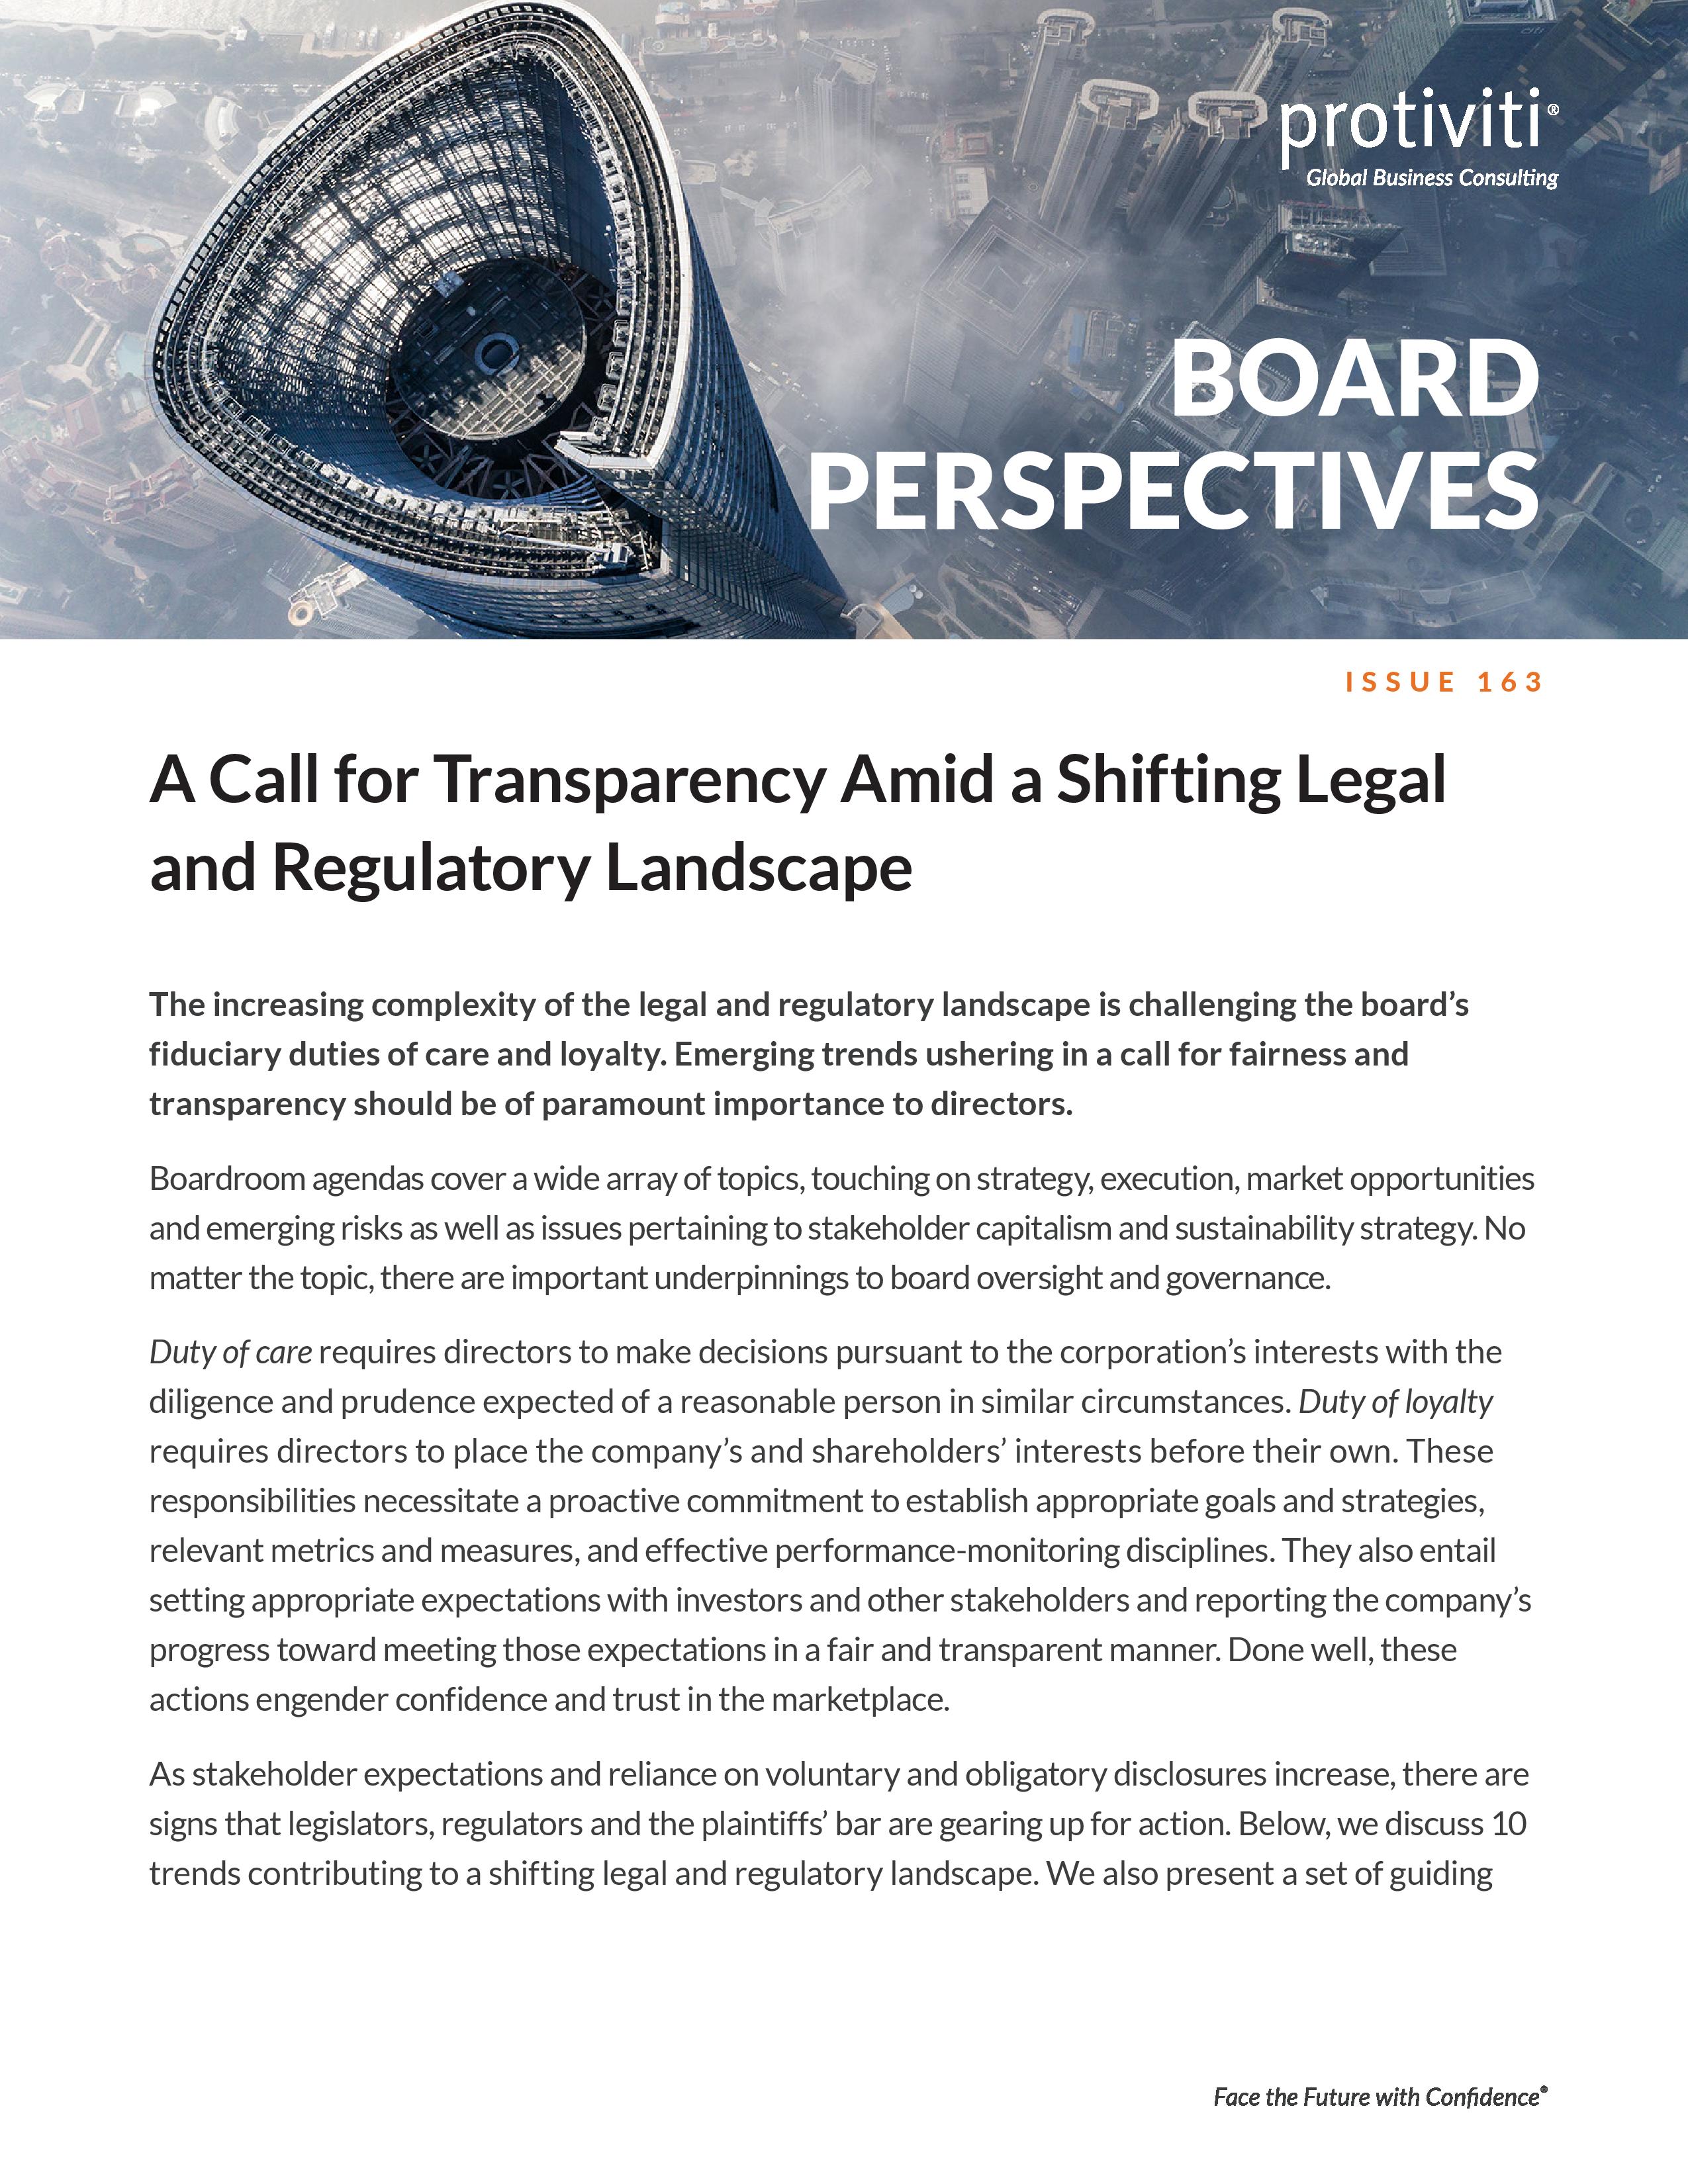 Screenshot of the first page of A Call for Transparency Amid a Shifting Legal and Regulatory Landscape